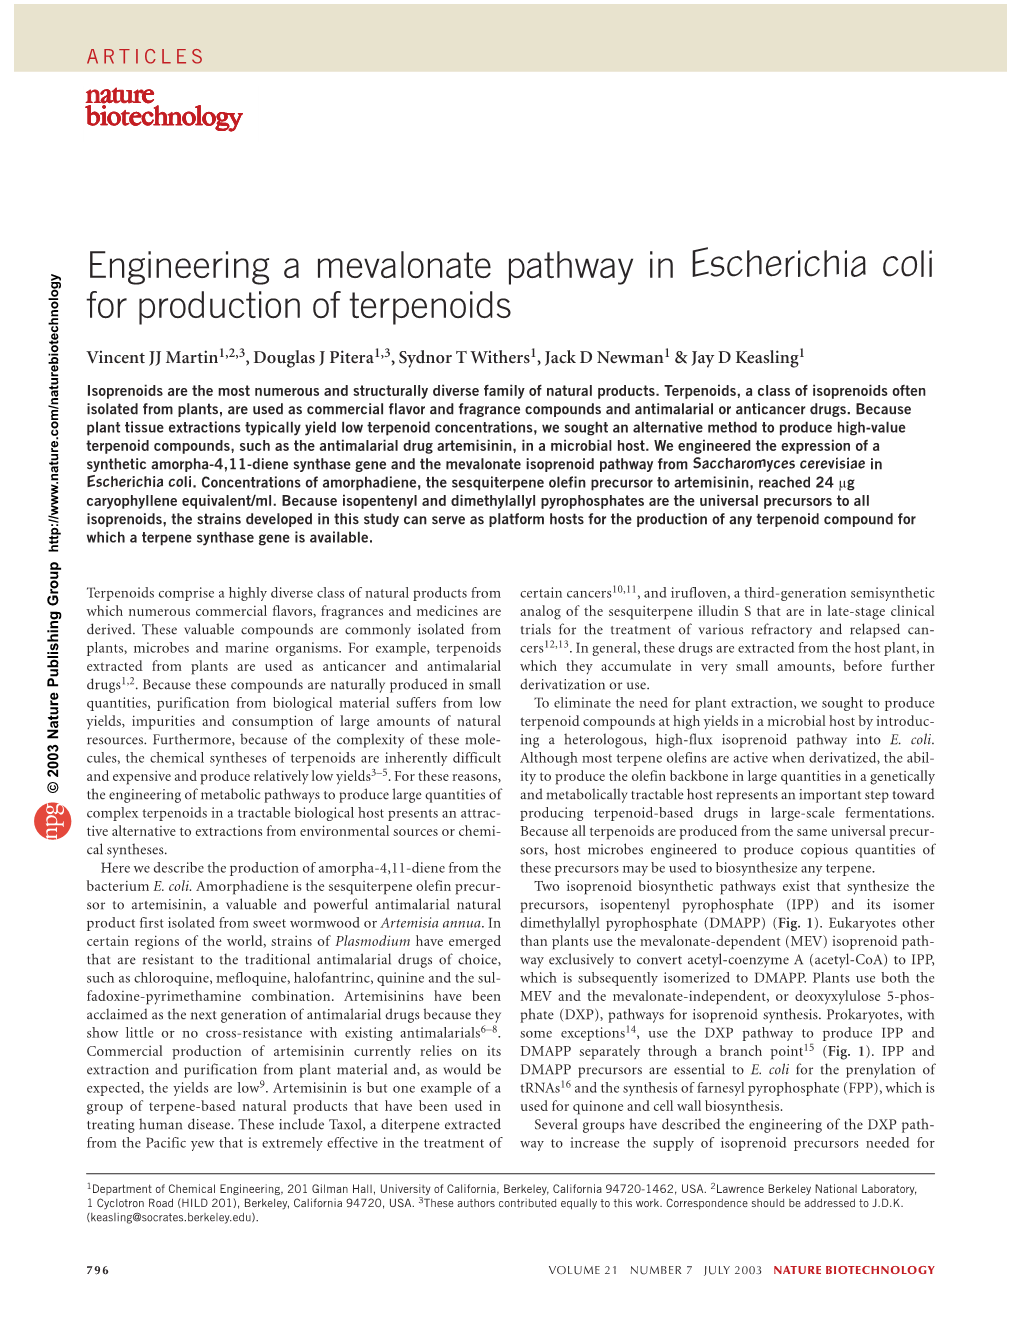 Engineering a Mevalonate Pathway in Escherichia Coli for Production of Terpenoids